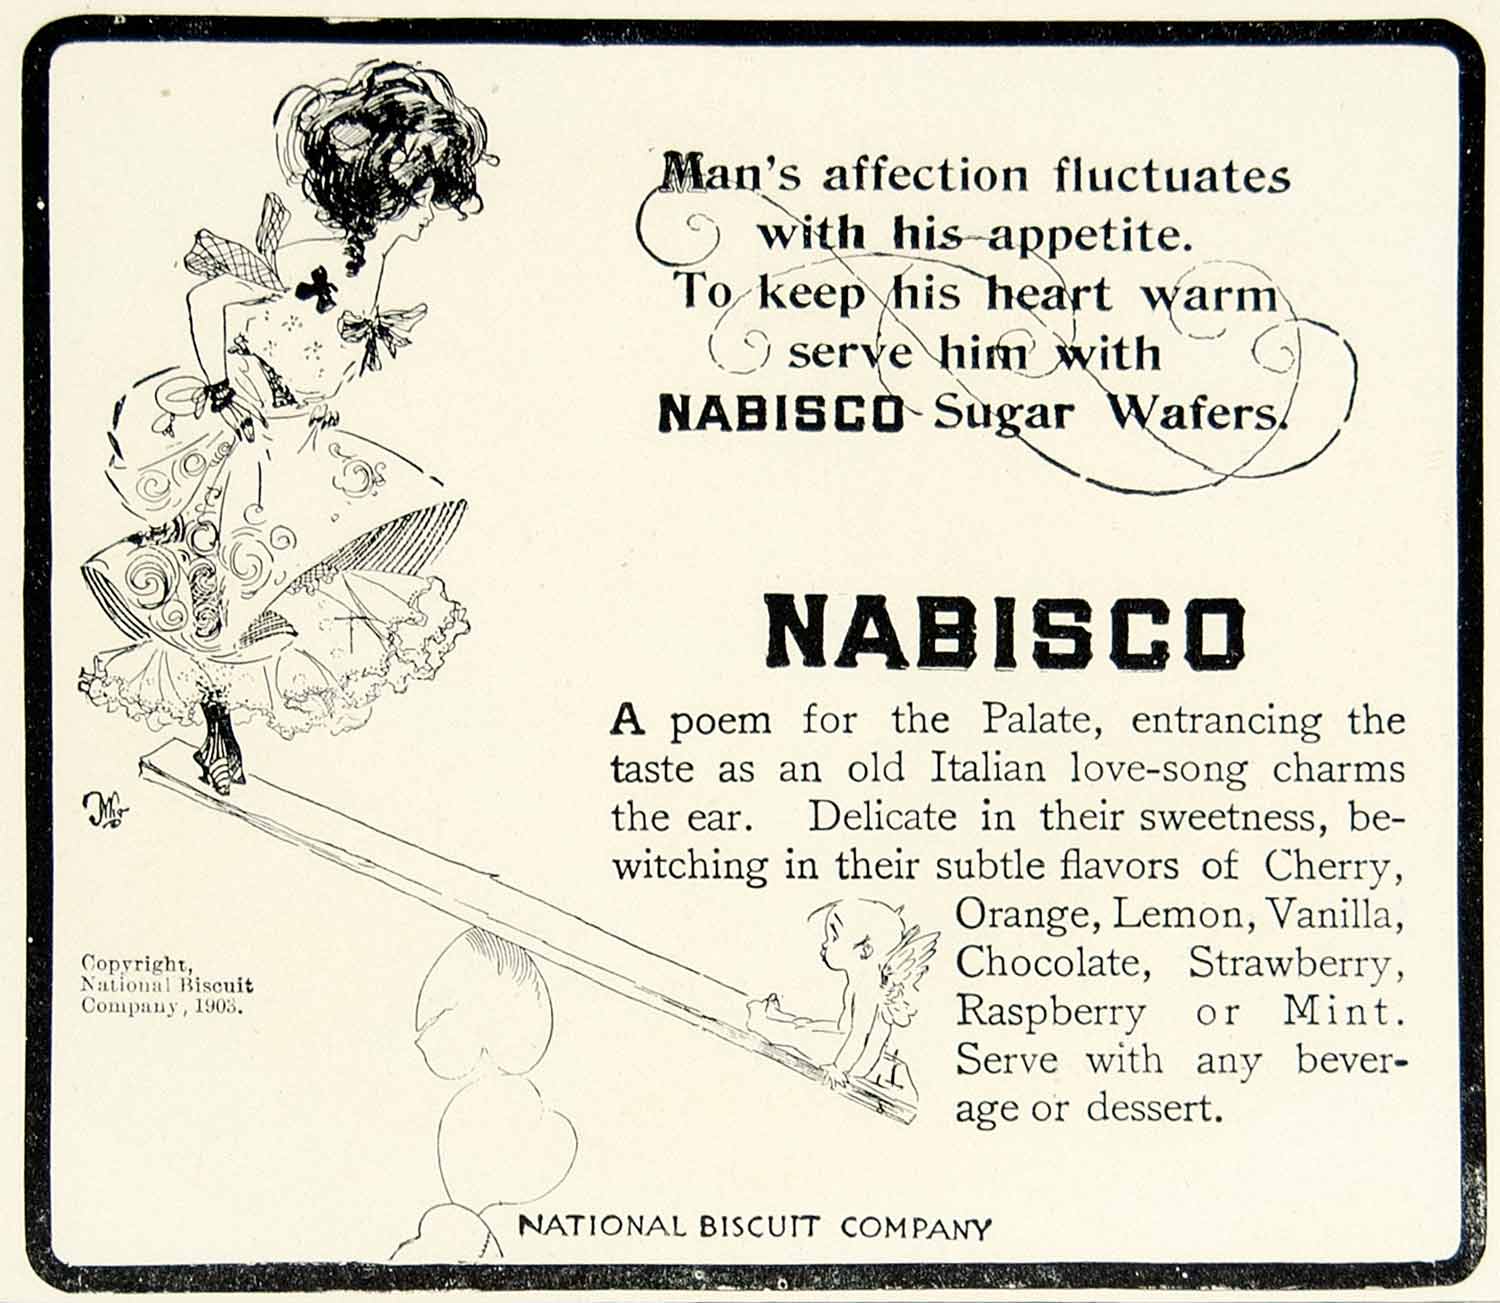 1903 Ad National Biscuit Nabisco Sugar Wafers Food Dessert Cookie Art YCL2